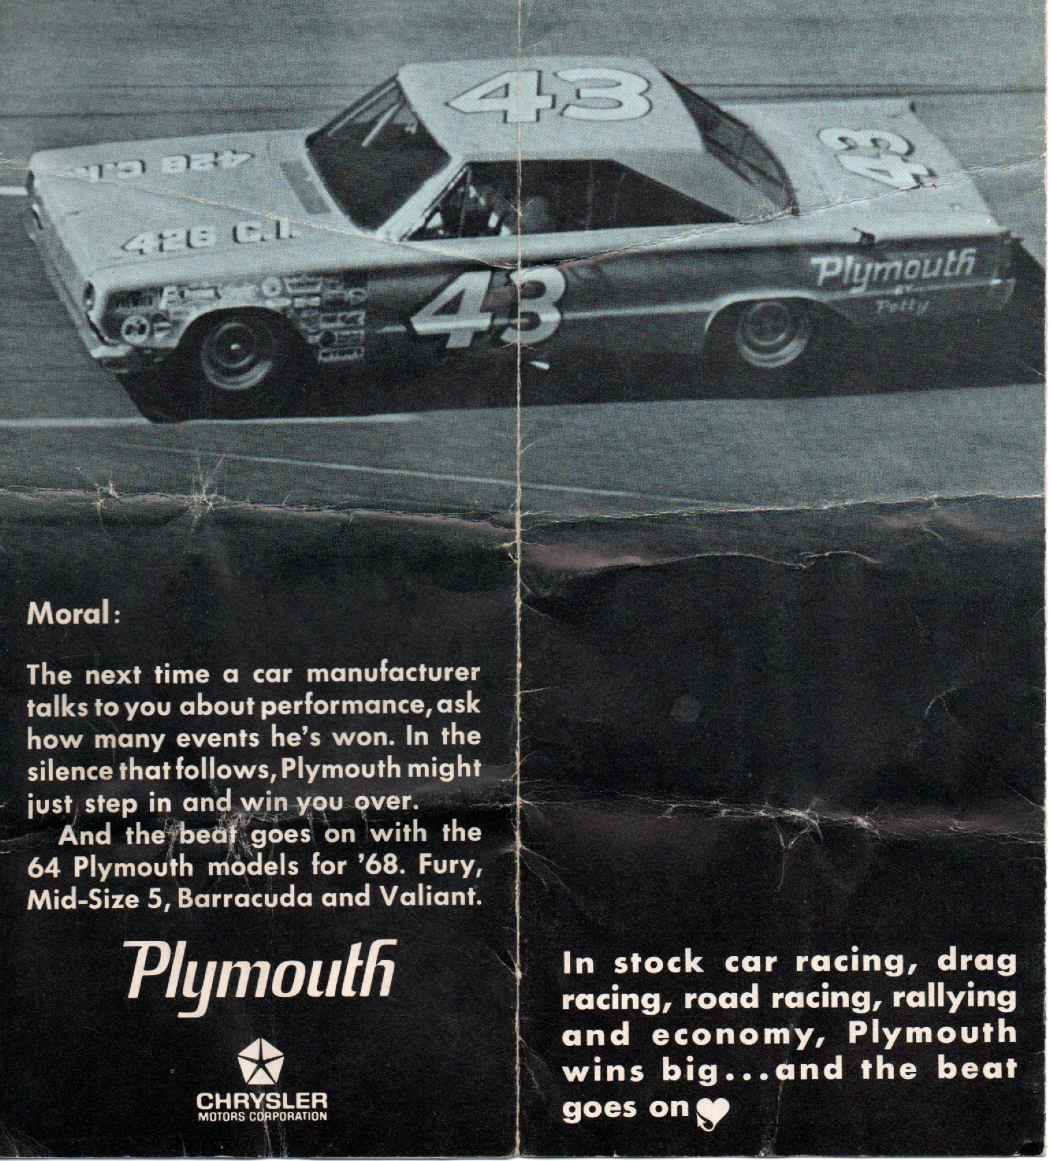 Primary image for 1967 plymouth Petty sets his own place stock car racing 2a